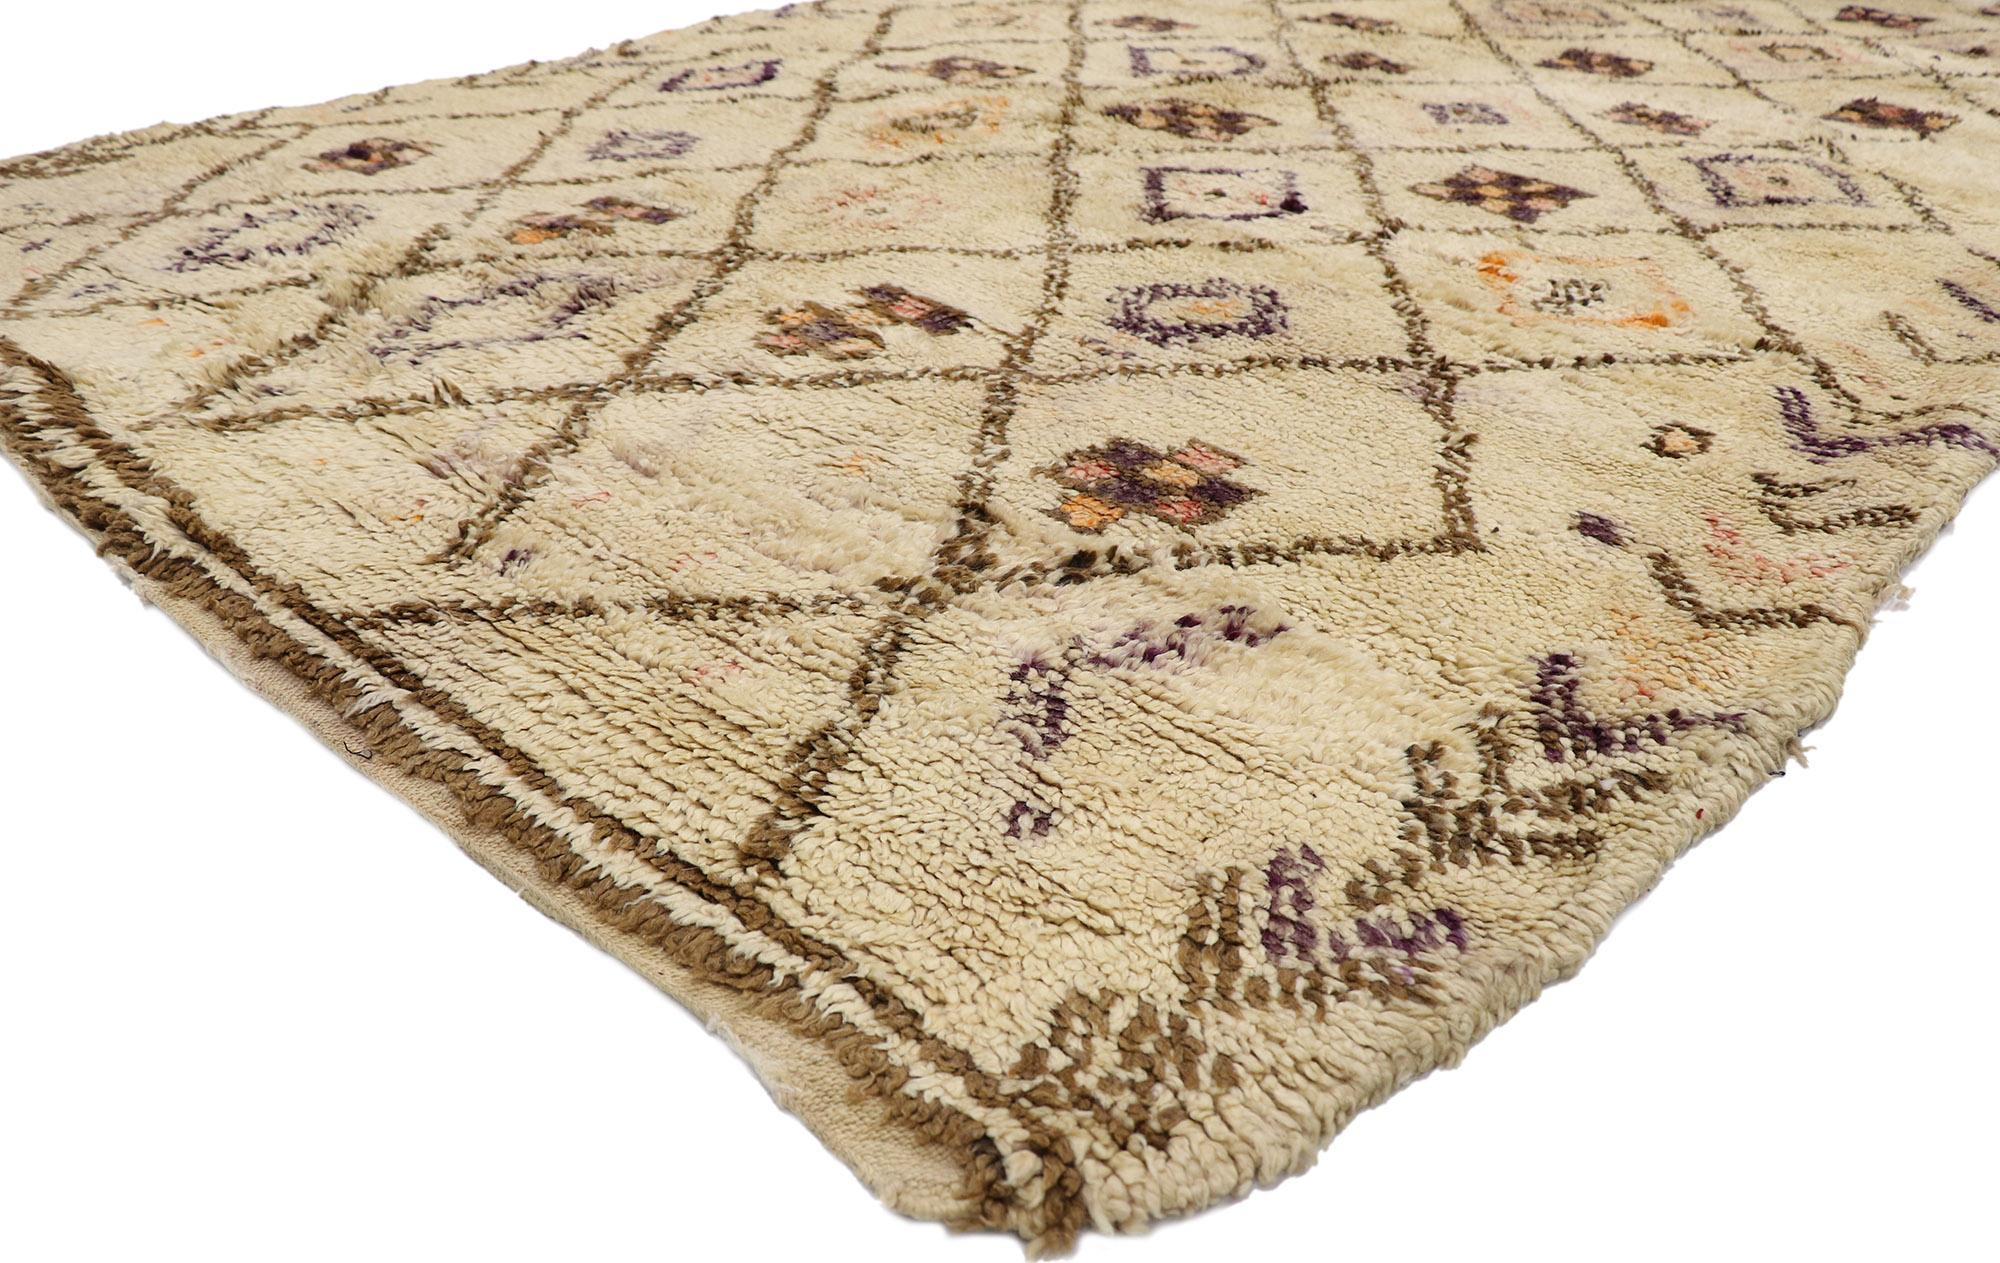 21361 Vintage Berber Beni Ourain Moroccan rug with Tribal Style 06'11 x 11'09. With its simplicity, plush pile and tribal style, this hand knotted wool vintage Berber Beni Ourain Moroccan rug is a captivating vision of woven beauty. It features a